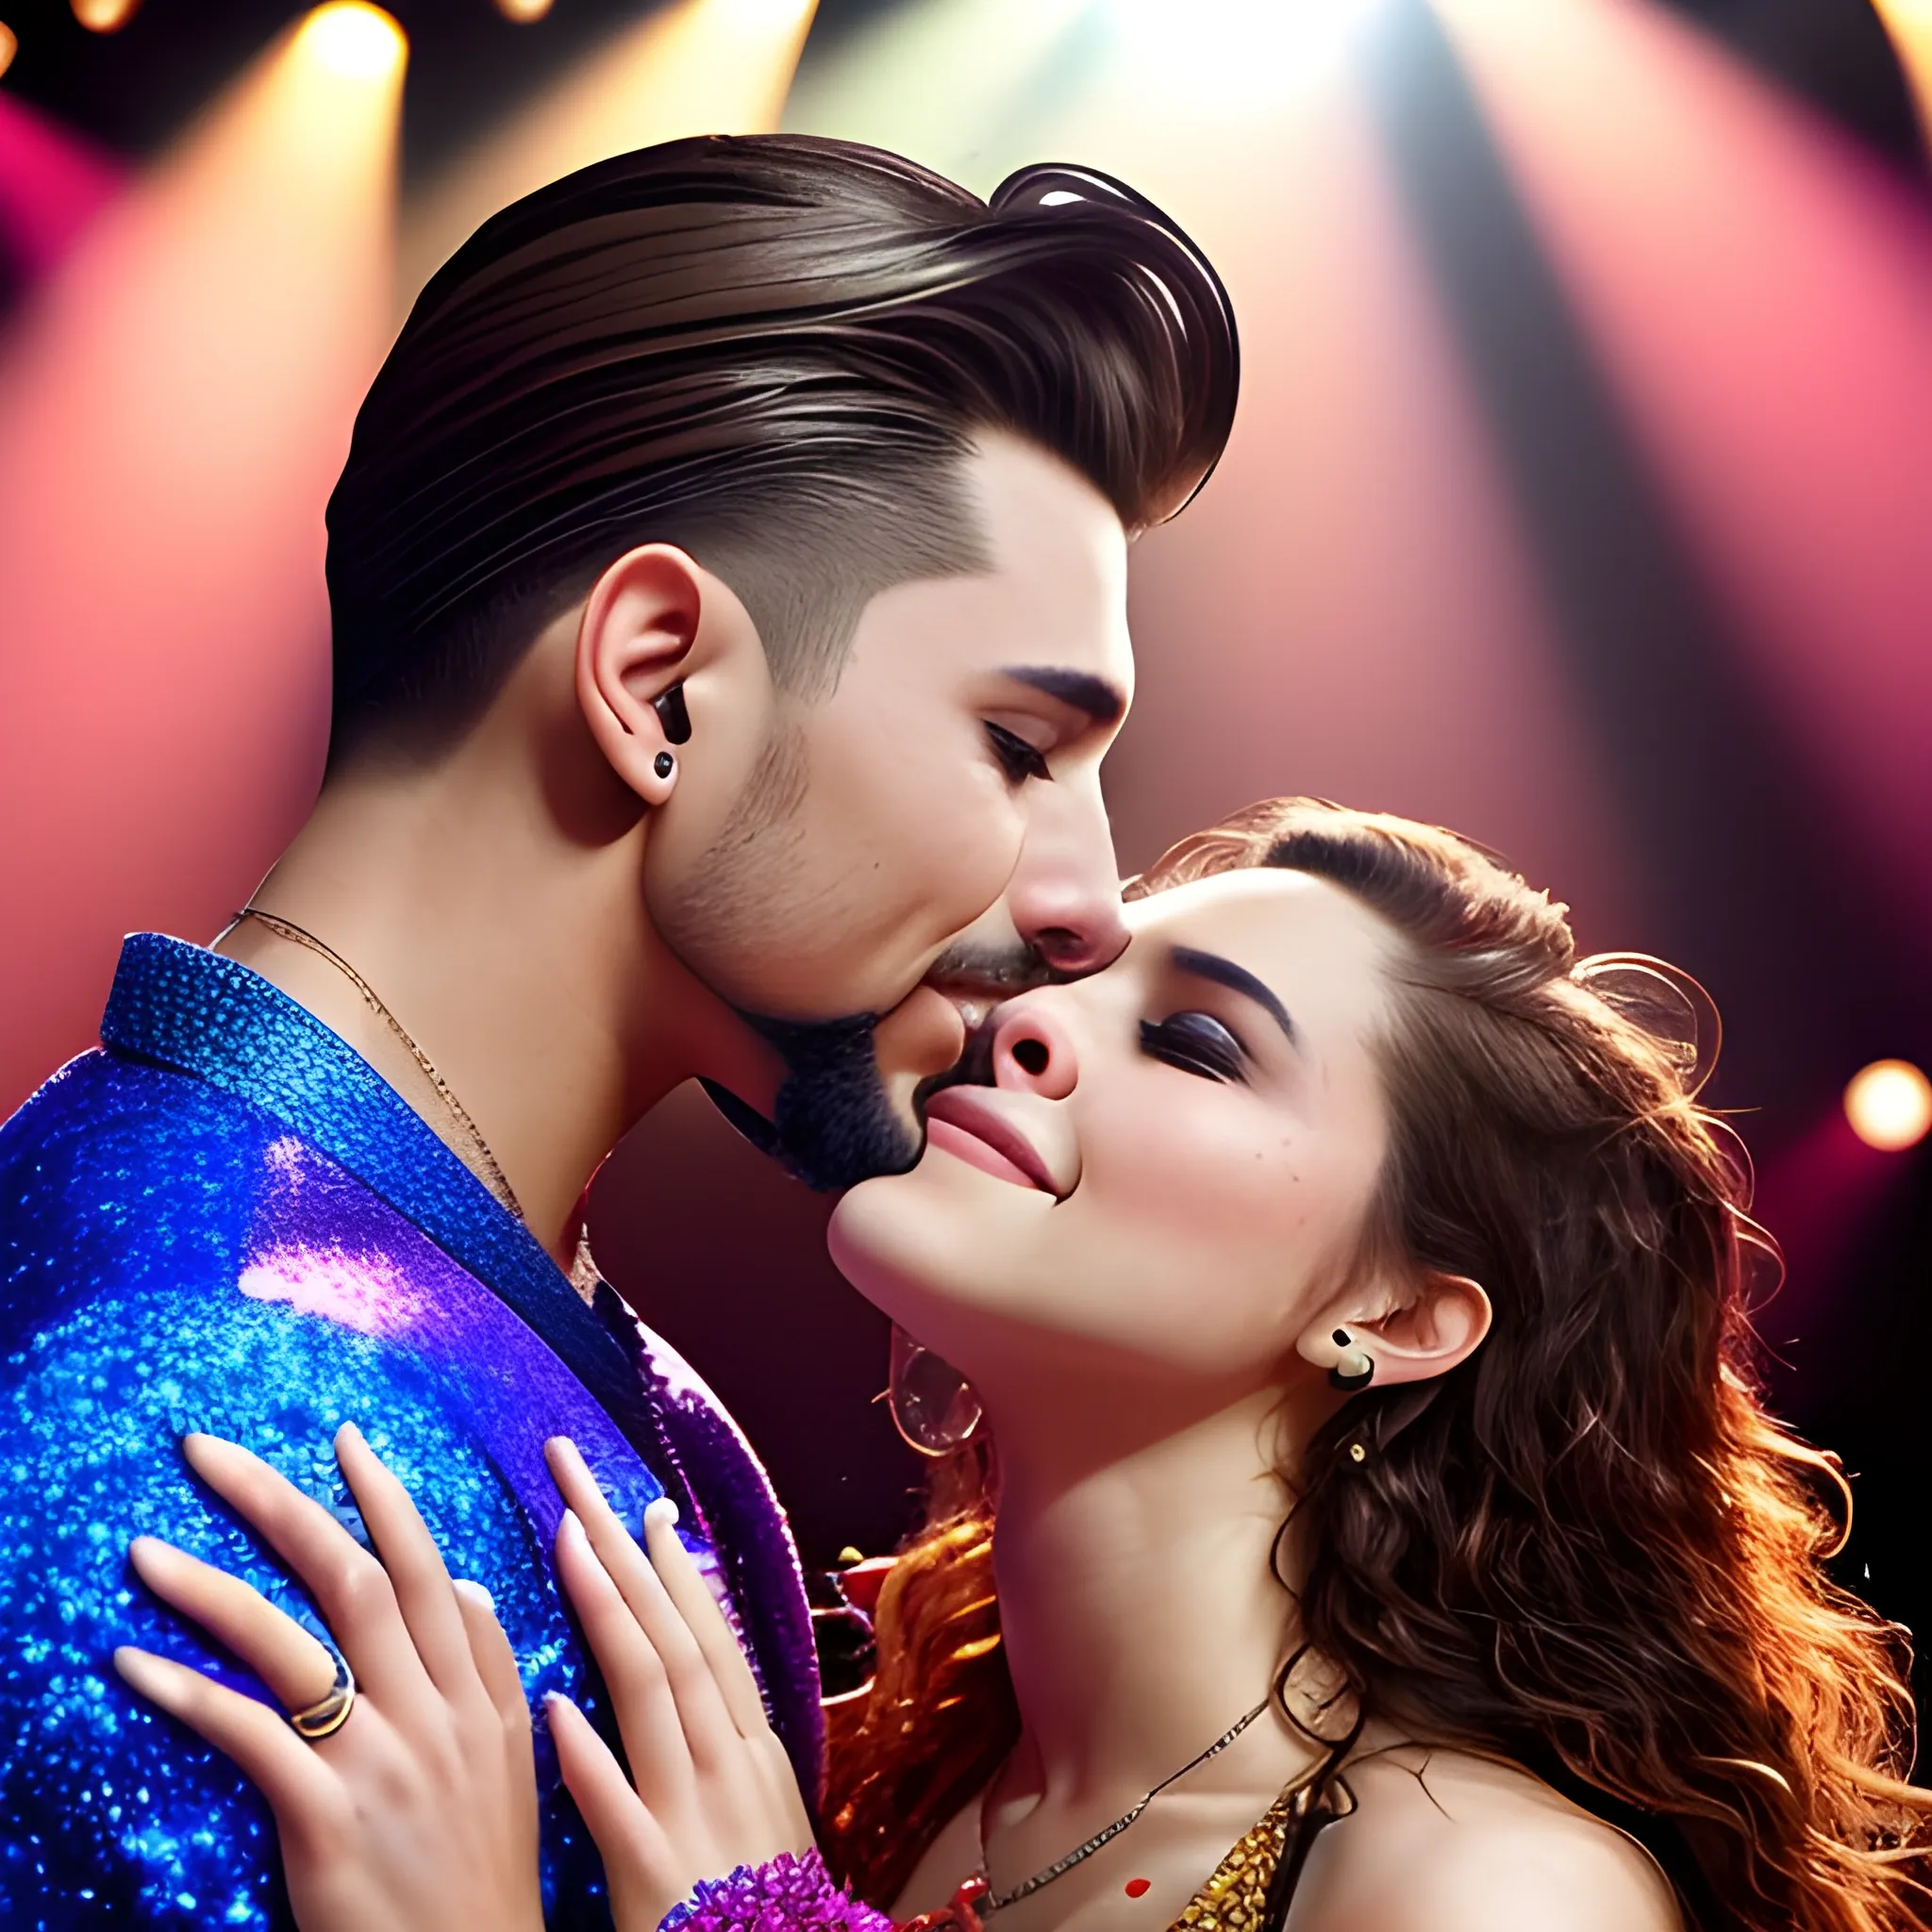 A male singer commands the stage with confidence, his distinctive goatee and brown undercut hair giving him a unique flair. Bathed in a bright spotlight, his movements exude charisma and musical passion. In the audience, a woman with long, straight brown hair watches him with love in her eyes, creating an intense connection. Sweets fall from the sky like sparkling, colorful stars, adding a magical and playful touch to the scene, where music and affection converge in a single unforgettable moment.